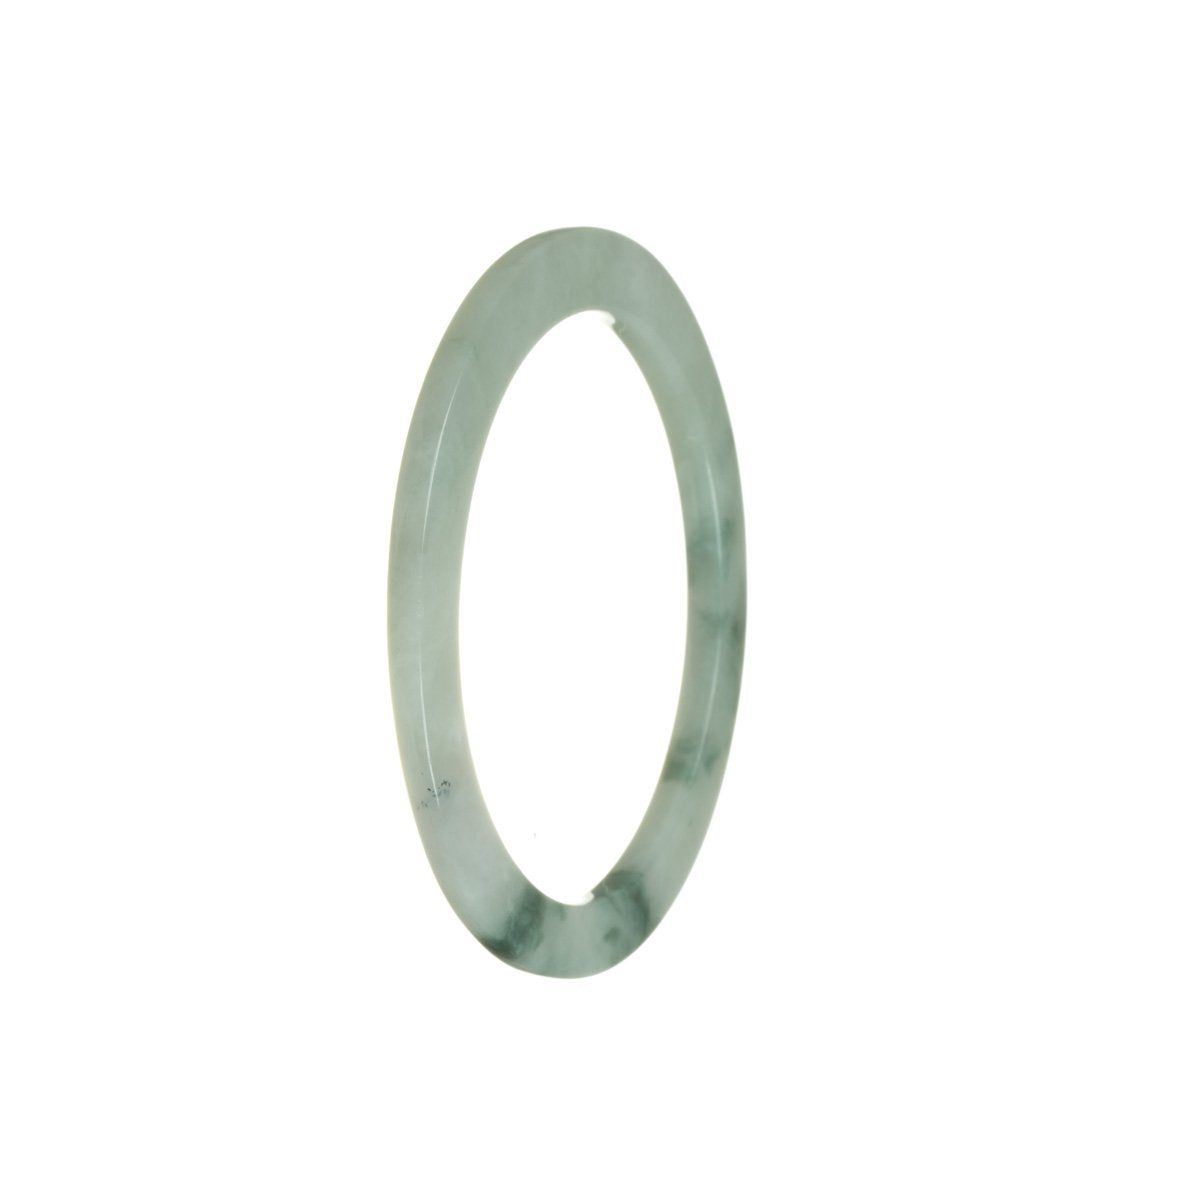 A thin, 55mm certified untreated Flower Jade bangle bracelet by MAYS.